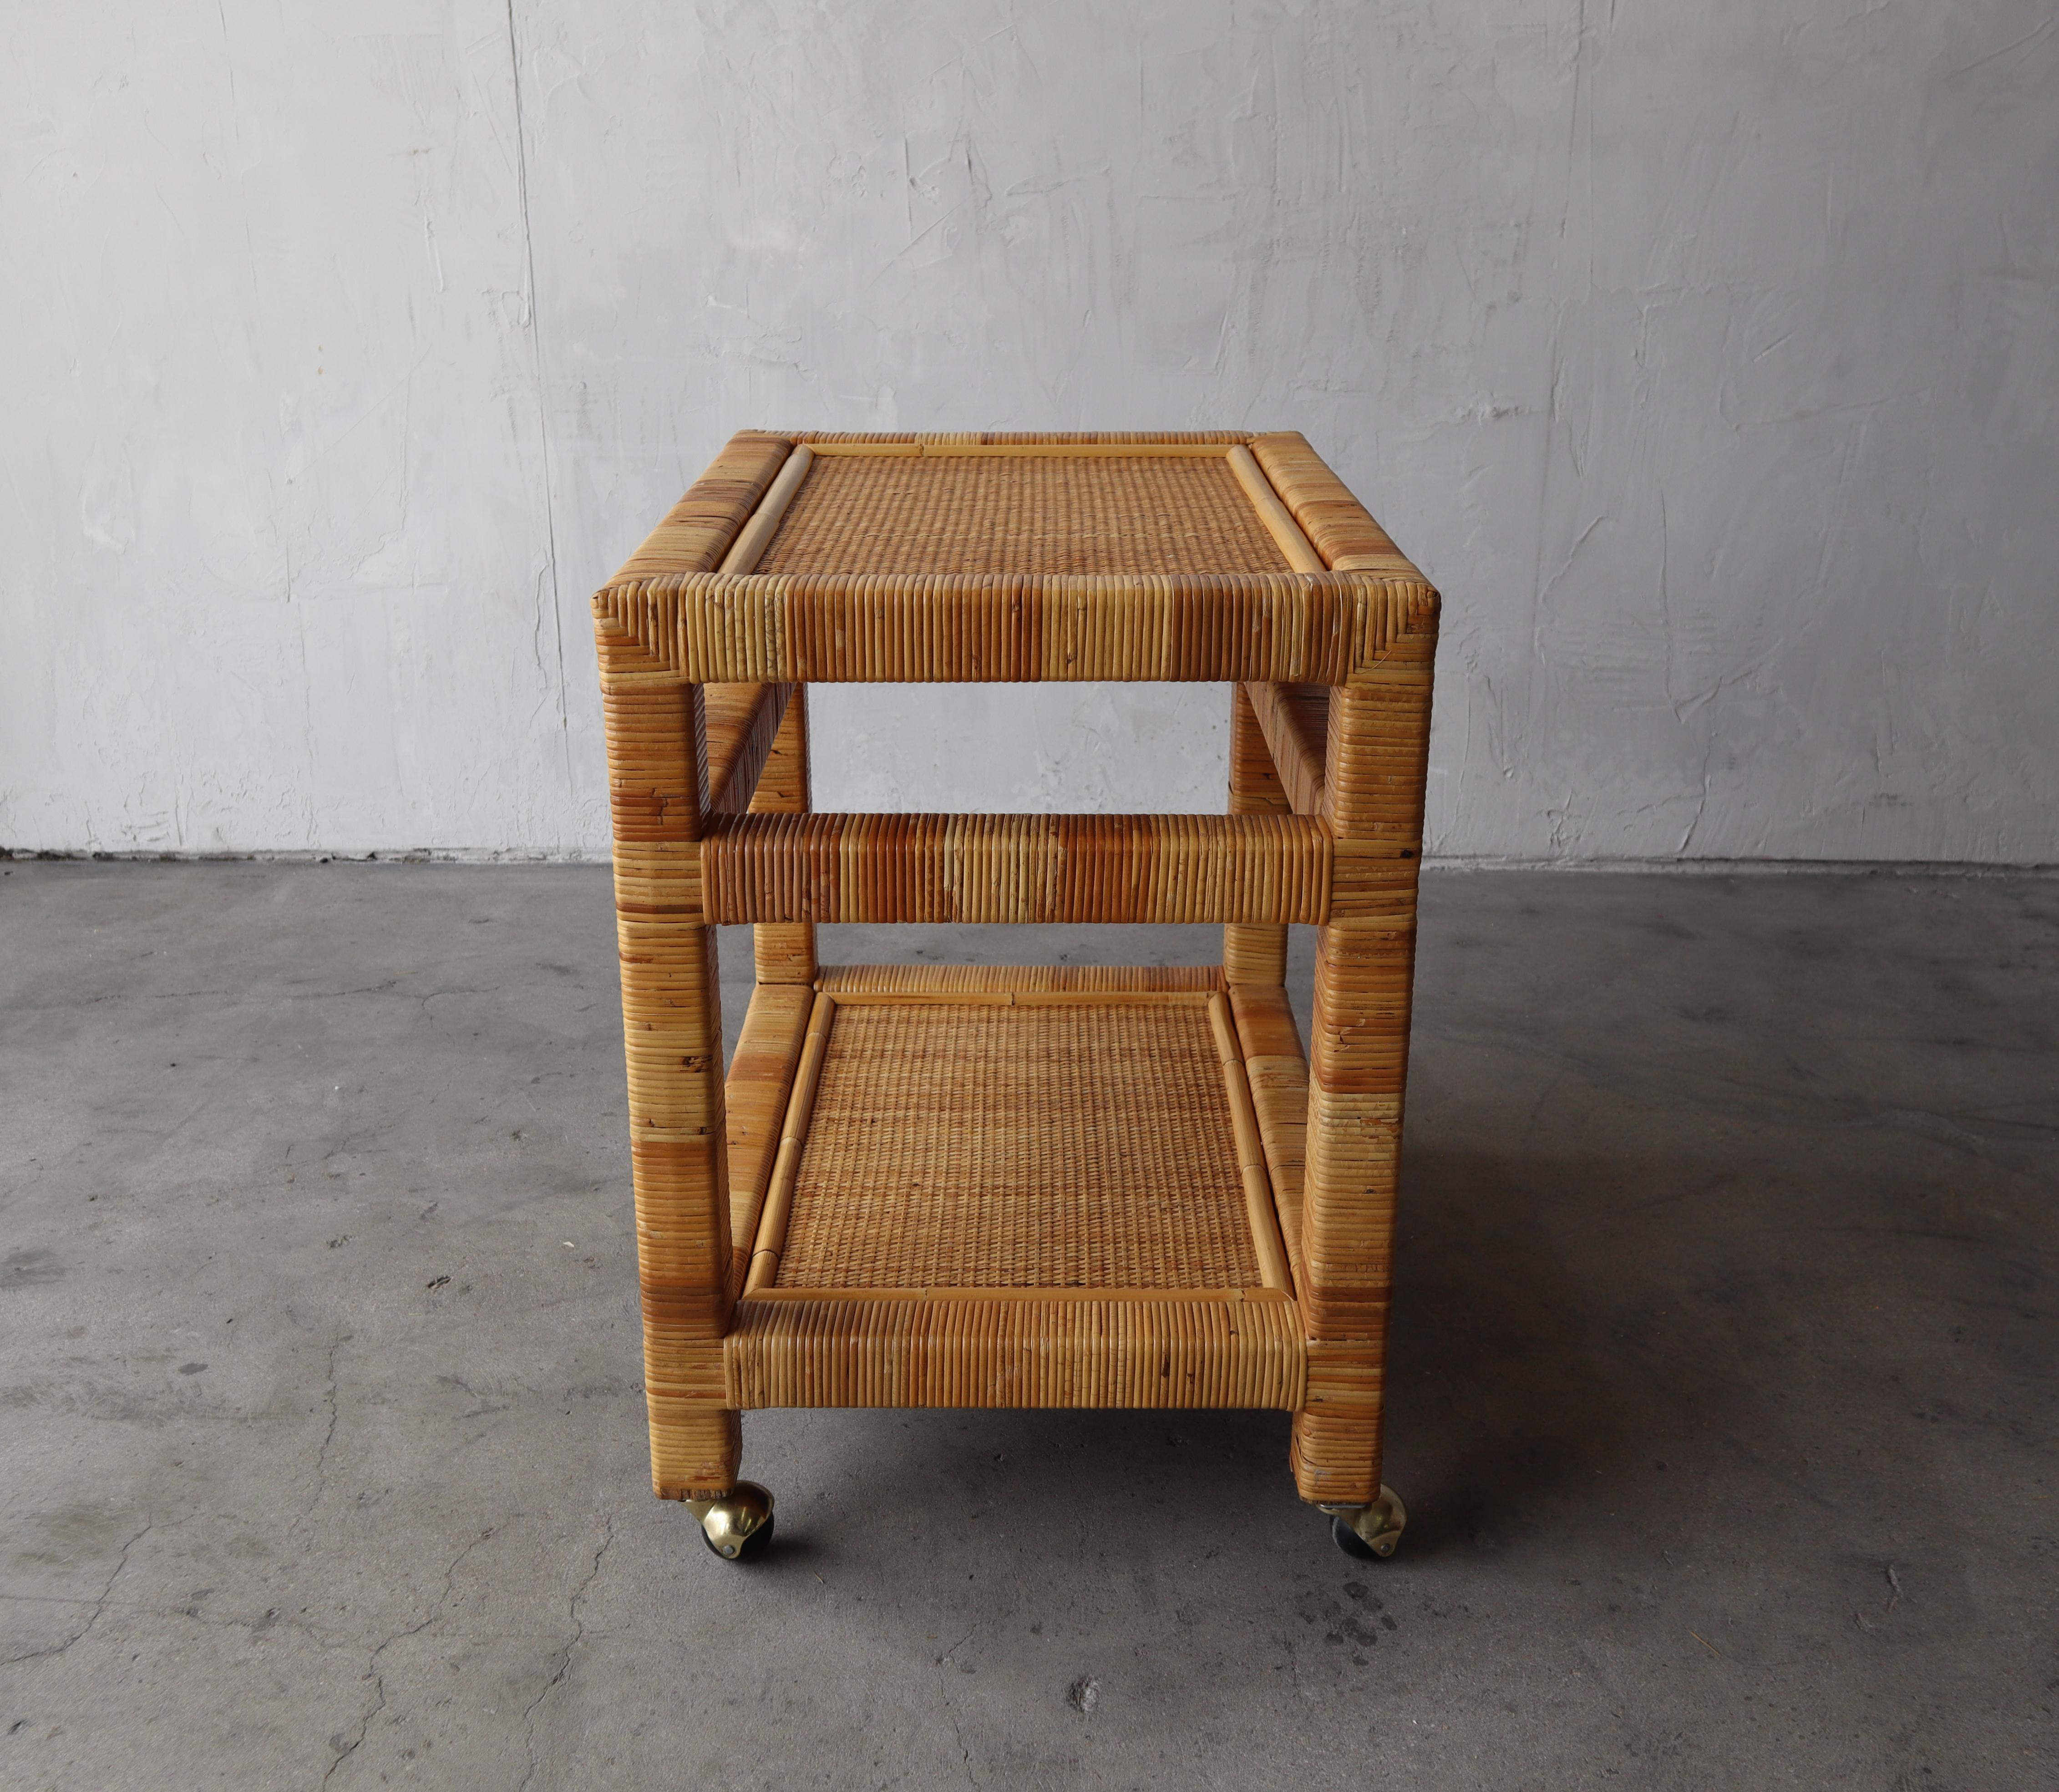 20th Century High Quality Vintage Wicker Petite Bar Cart For Sale